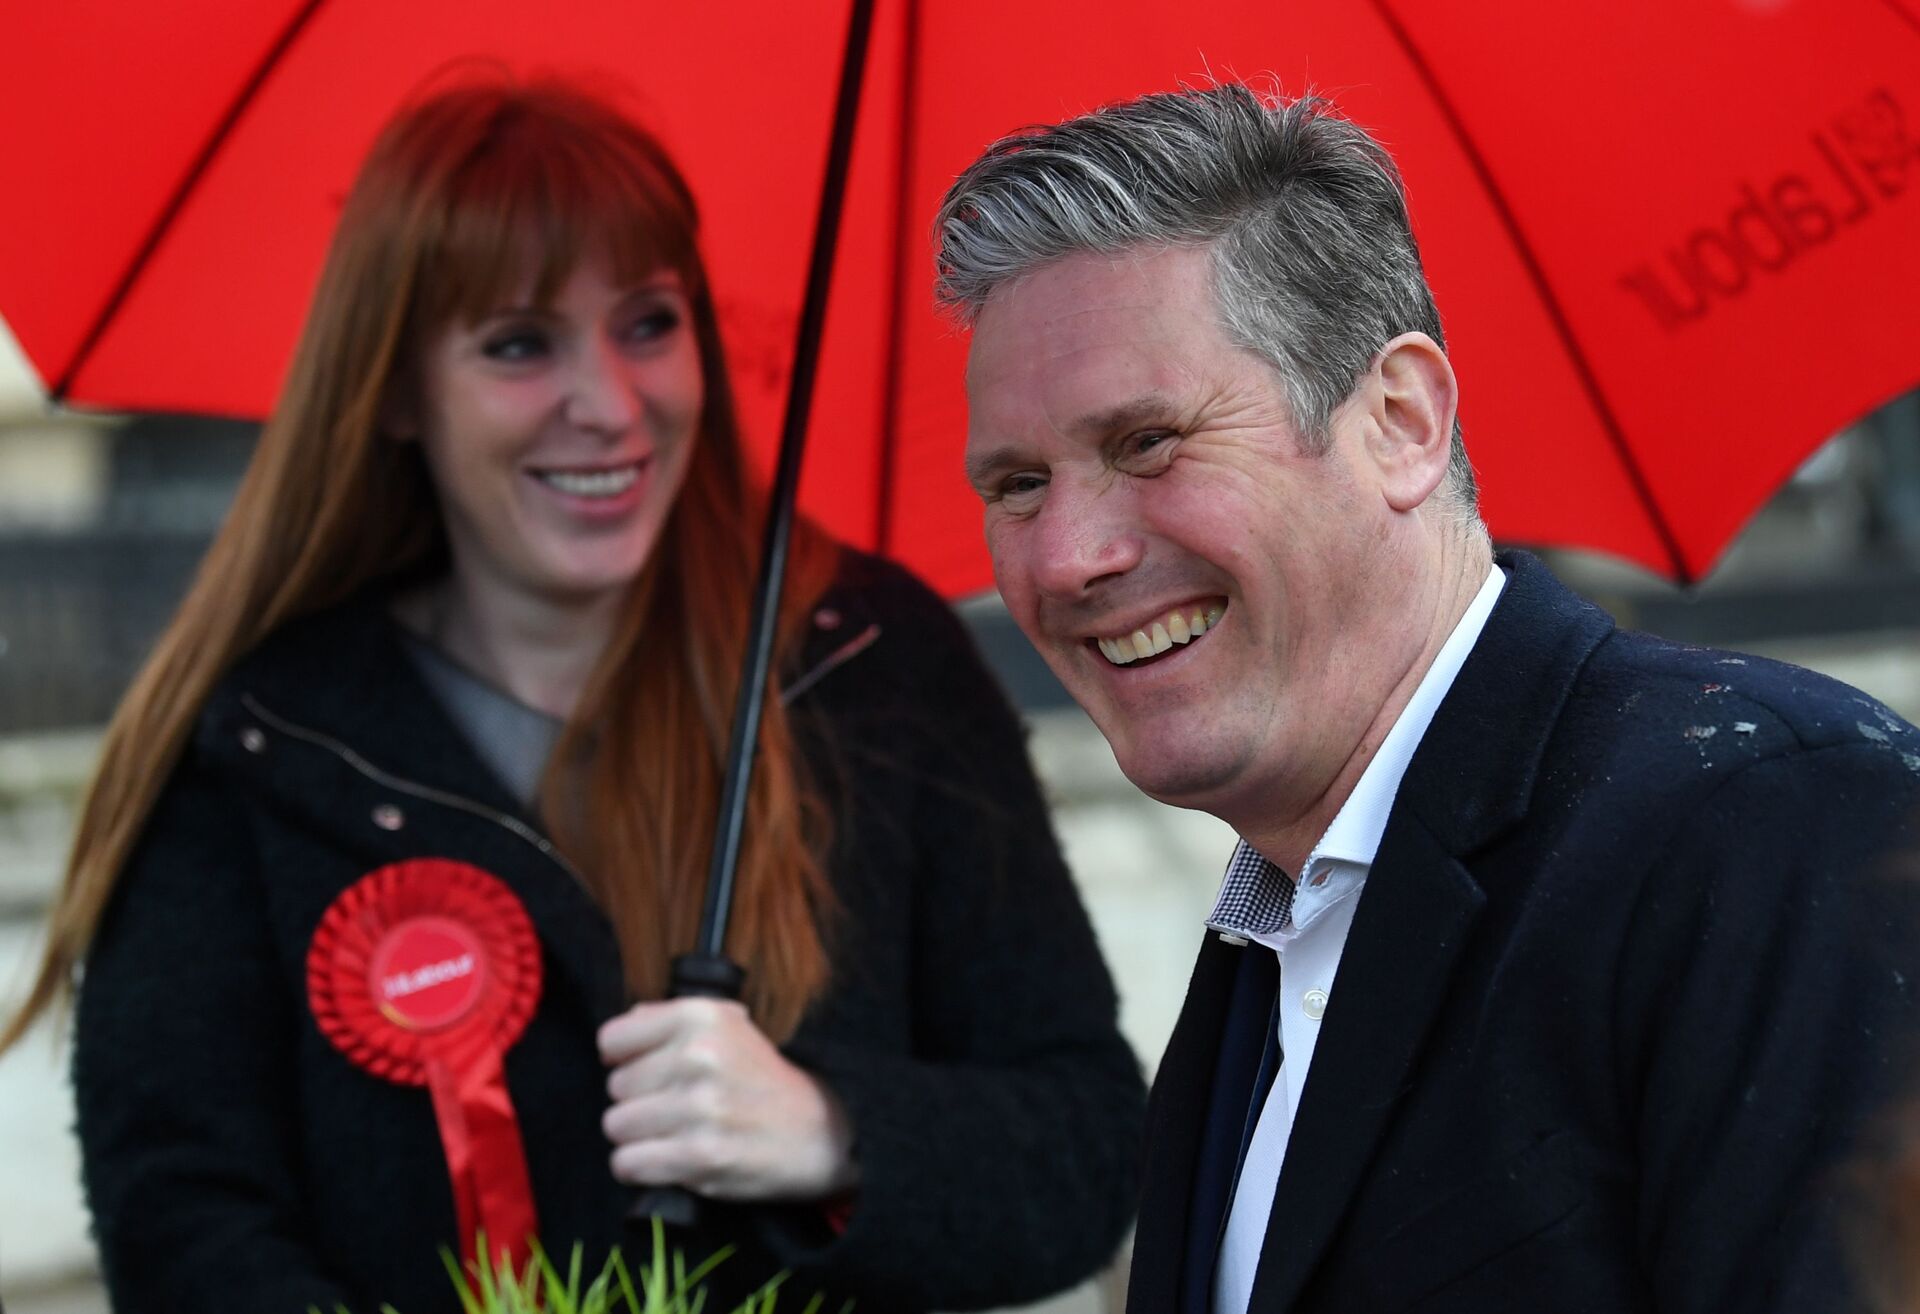 Labour Party leader Keir Starmer campaigns ahead of local elections, in Birmingham - Sputnik International, 1920, 07.09.2021